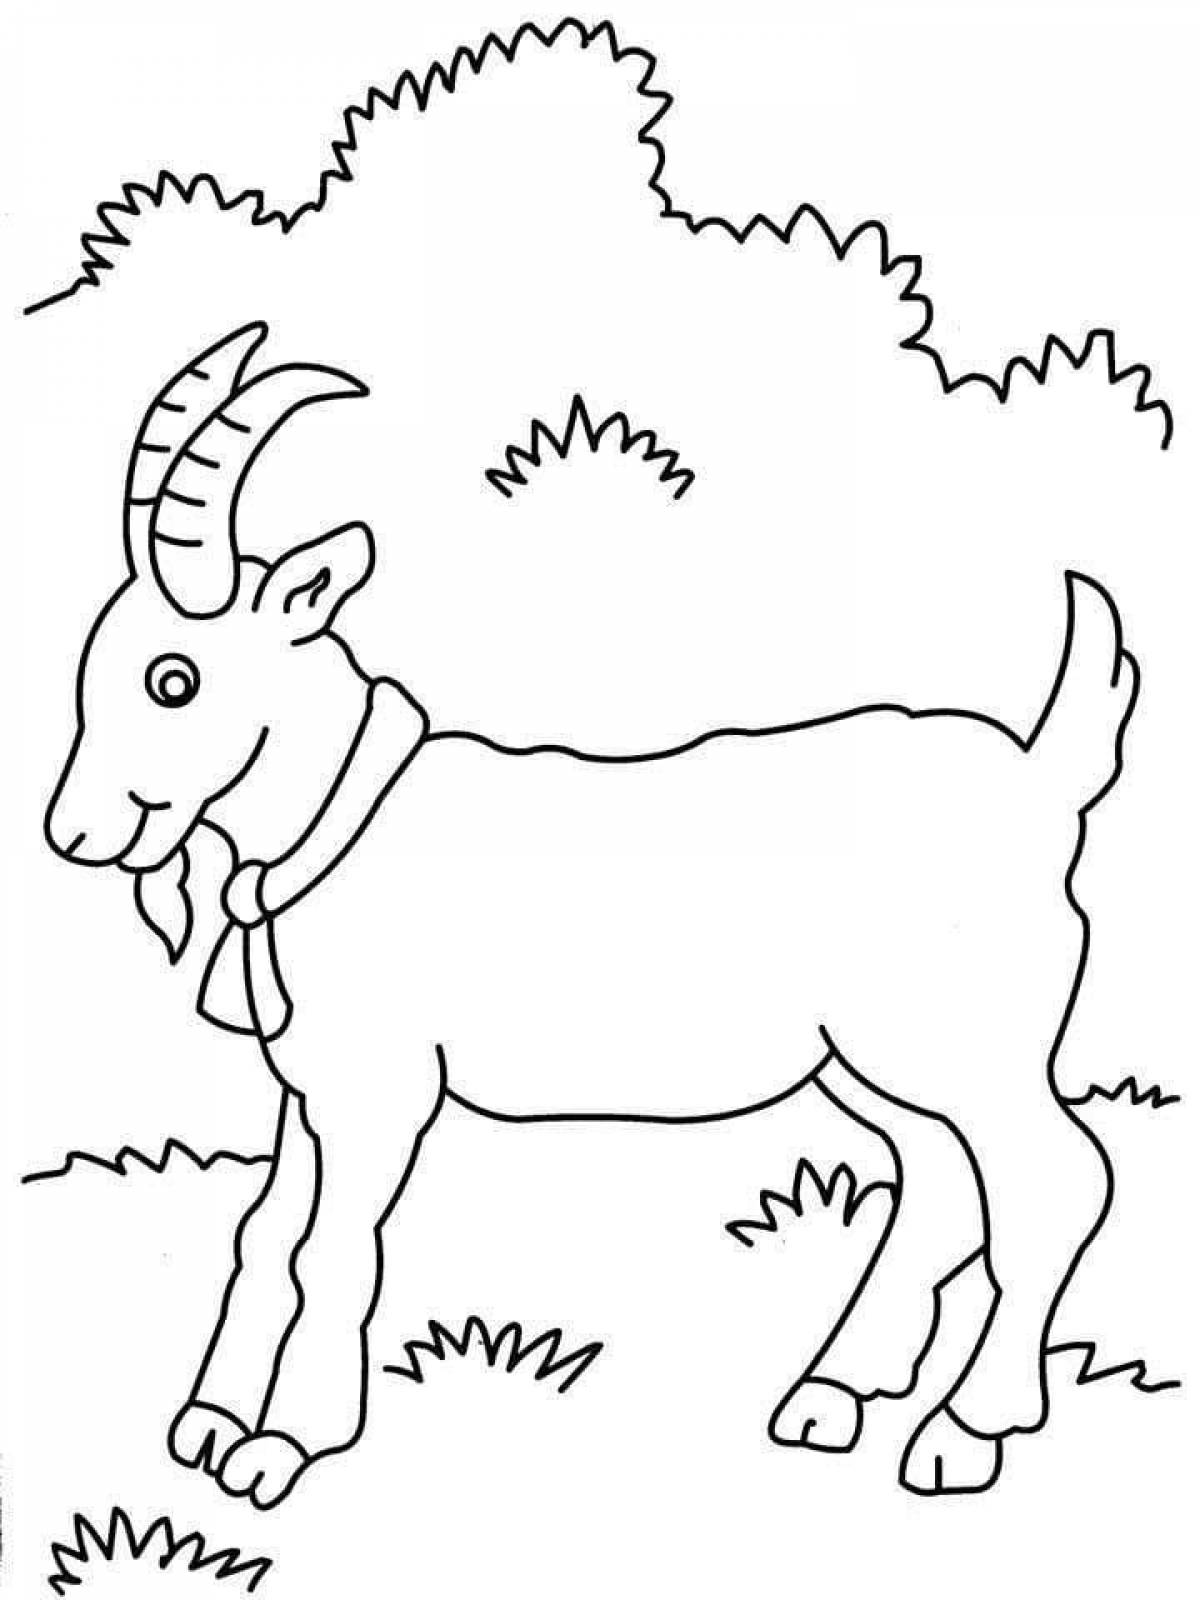 Sweet pet coloring pages for kids